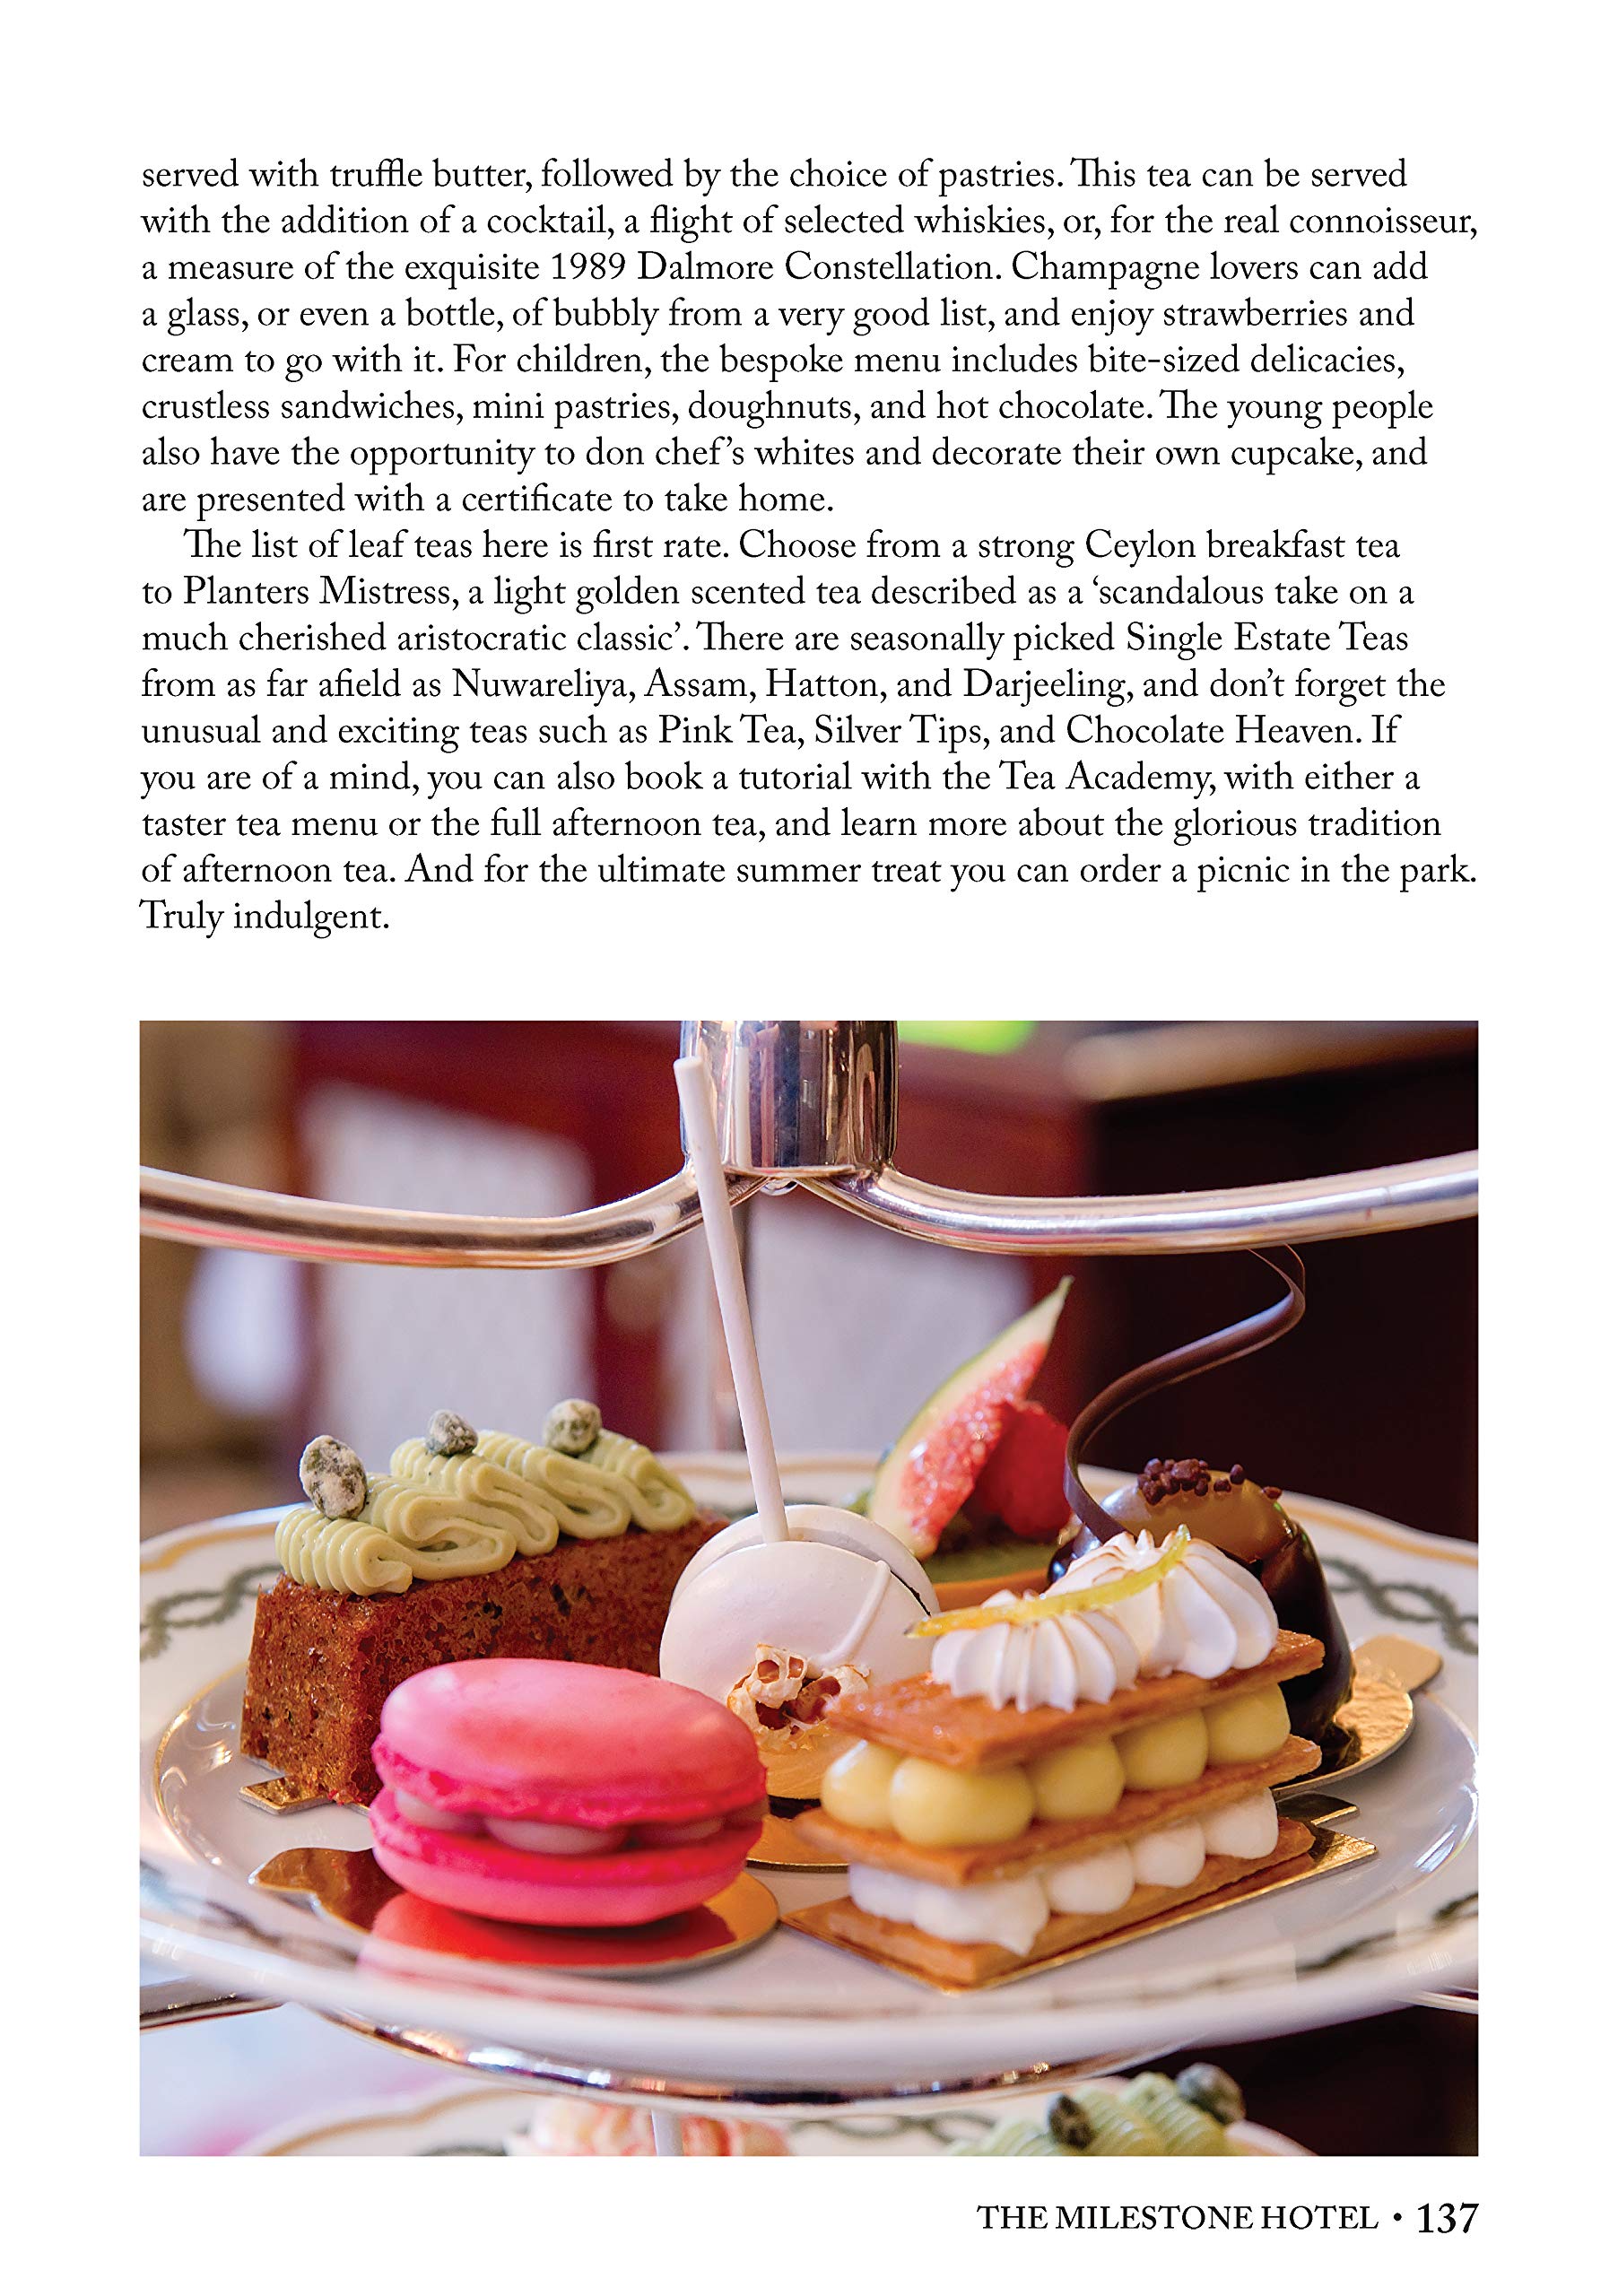 London's Afternoon Teas, Revised and Expanded 2nd Edition: A Guide to the Most Exquisite Tea Venues in London (IMM Lifestyle) 60 of the Best Places to Take Tea, with Recipes, Venue History, & More